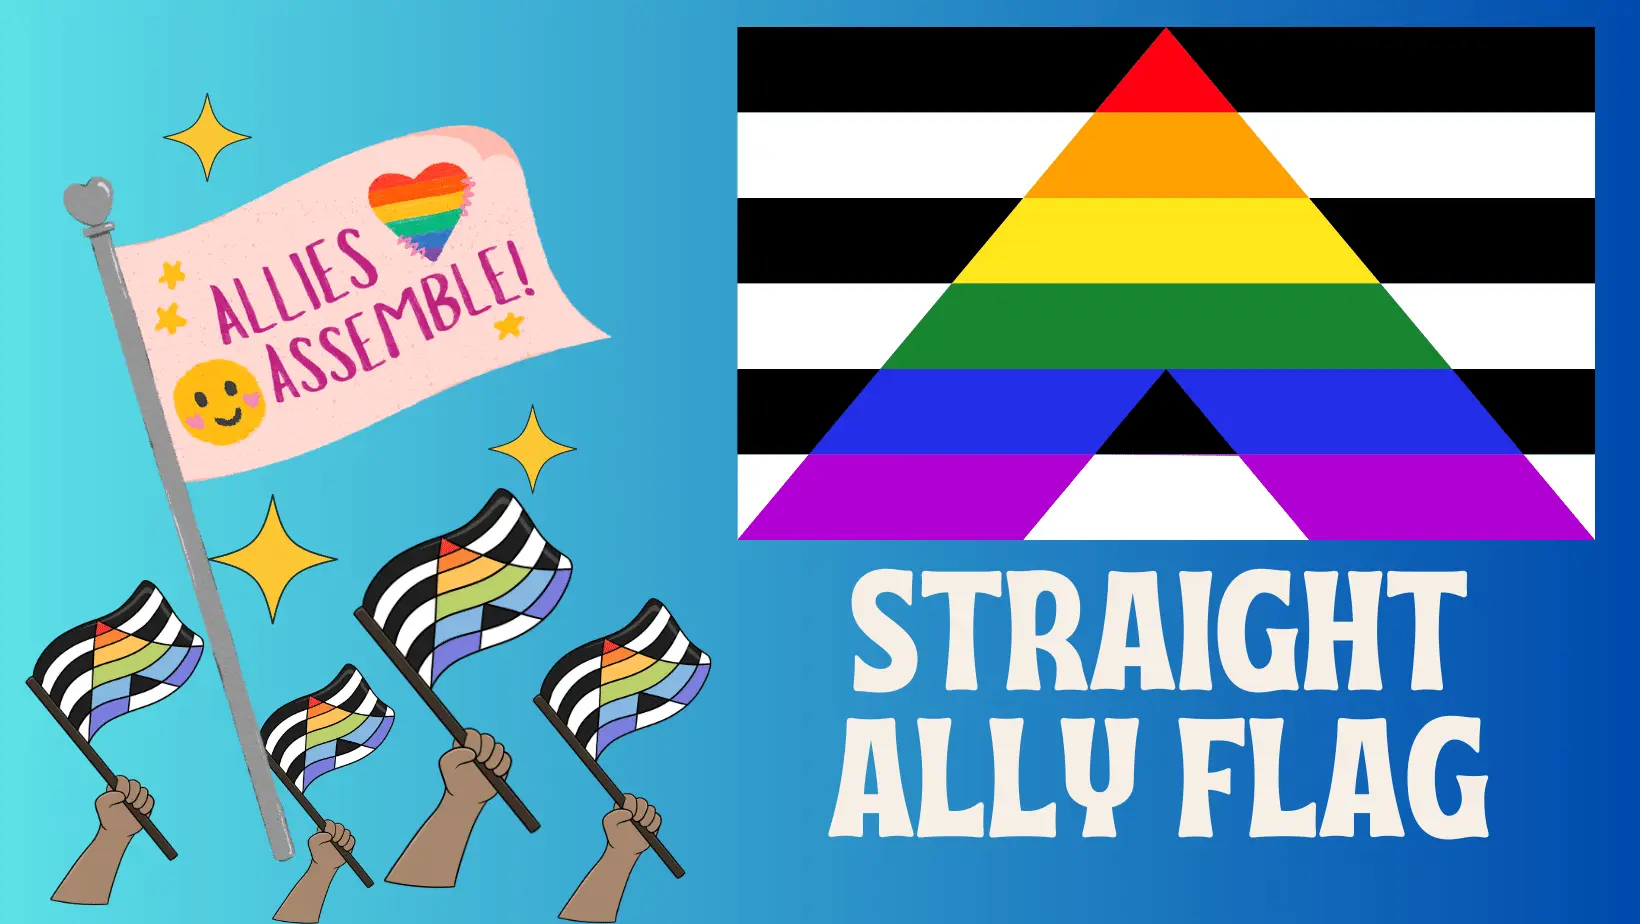 Straight Ally Flag - A useful symbol or pointless accessory?